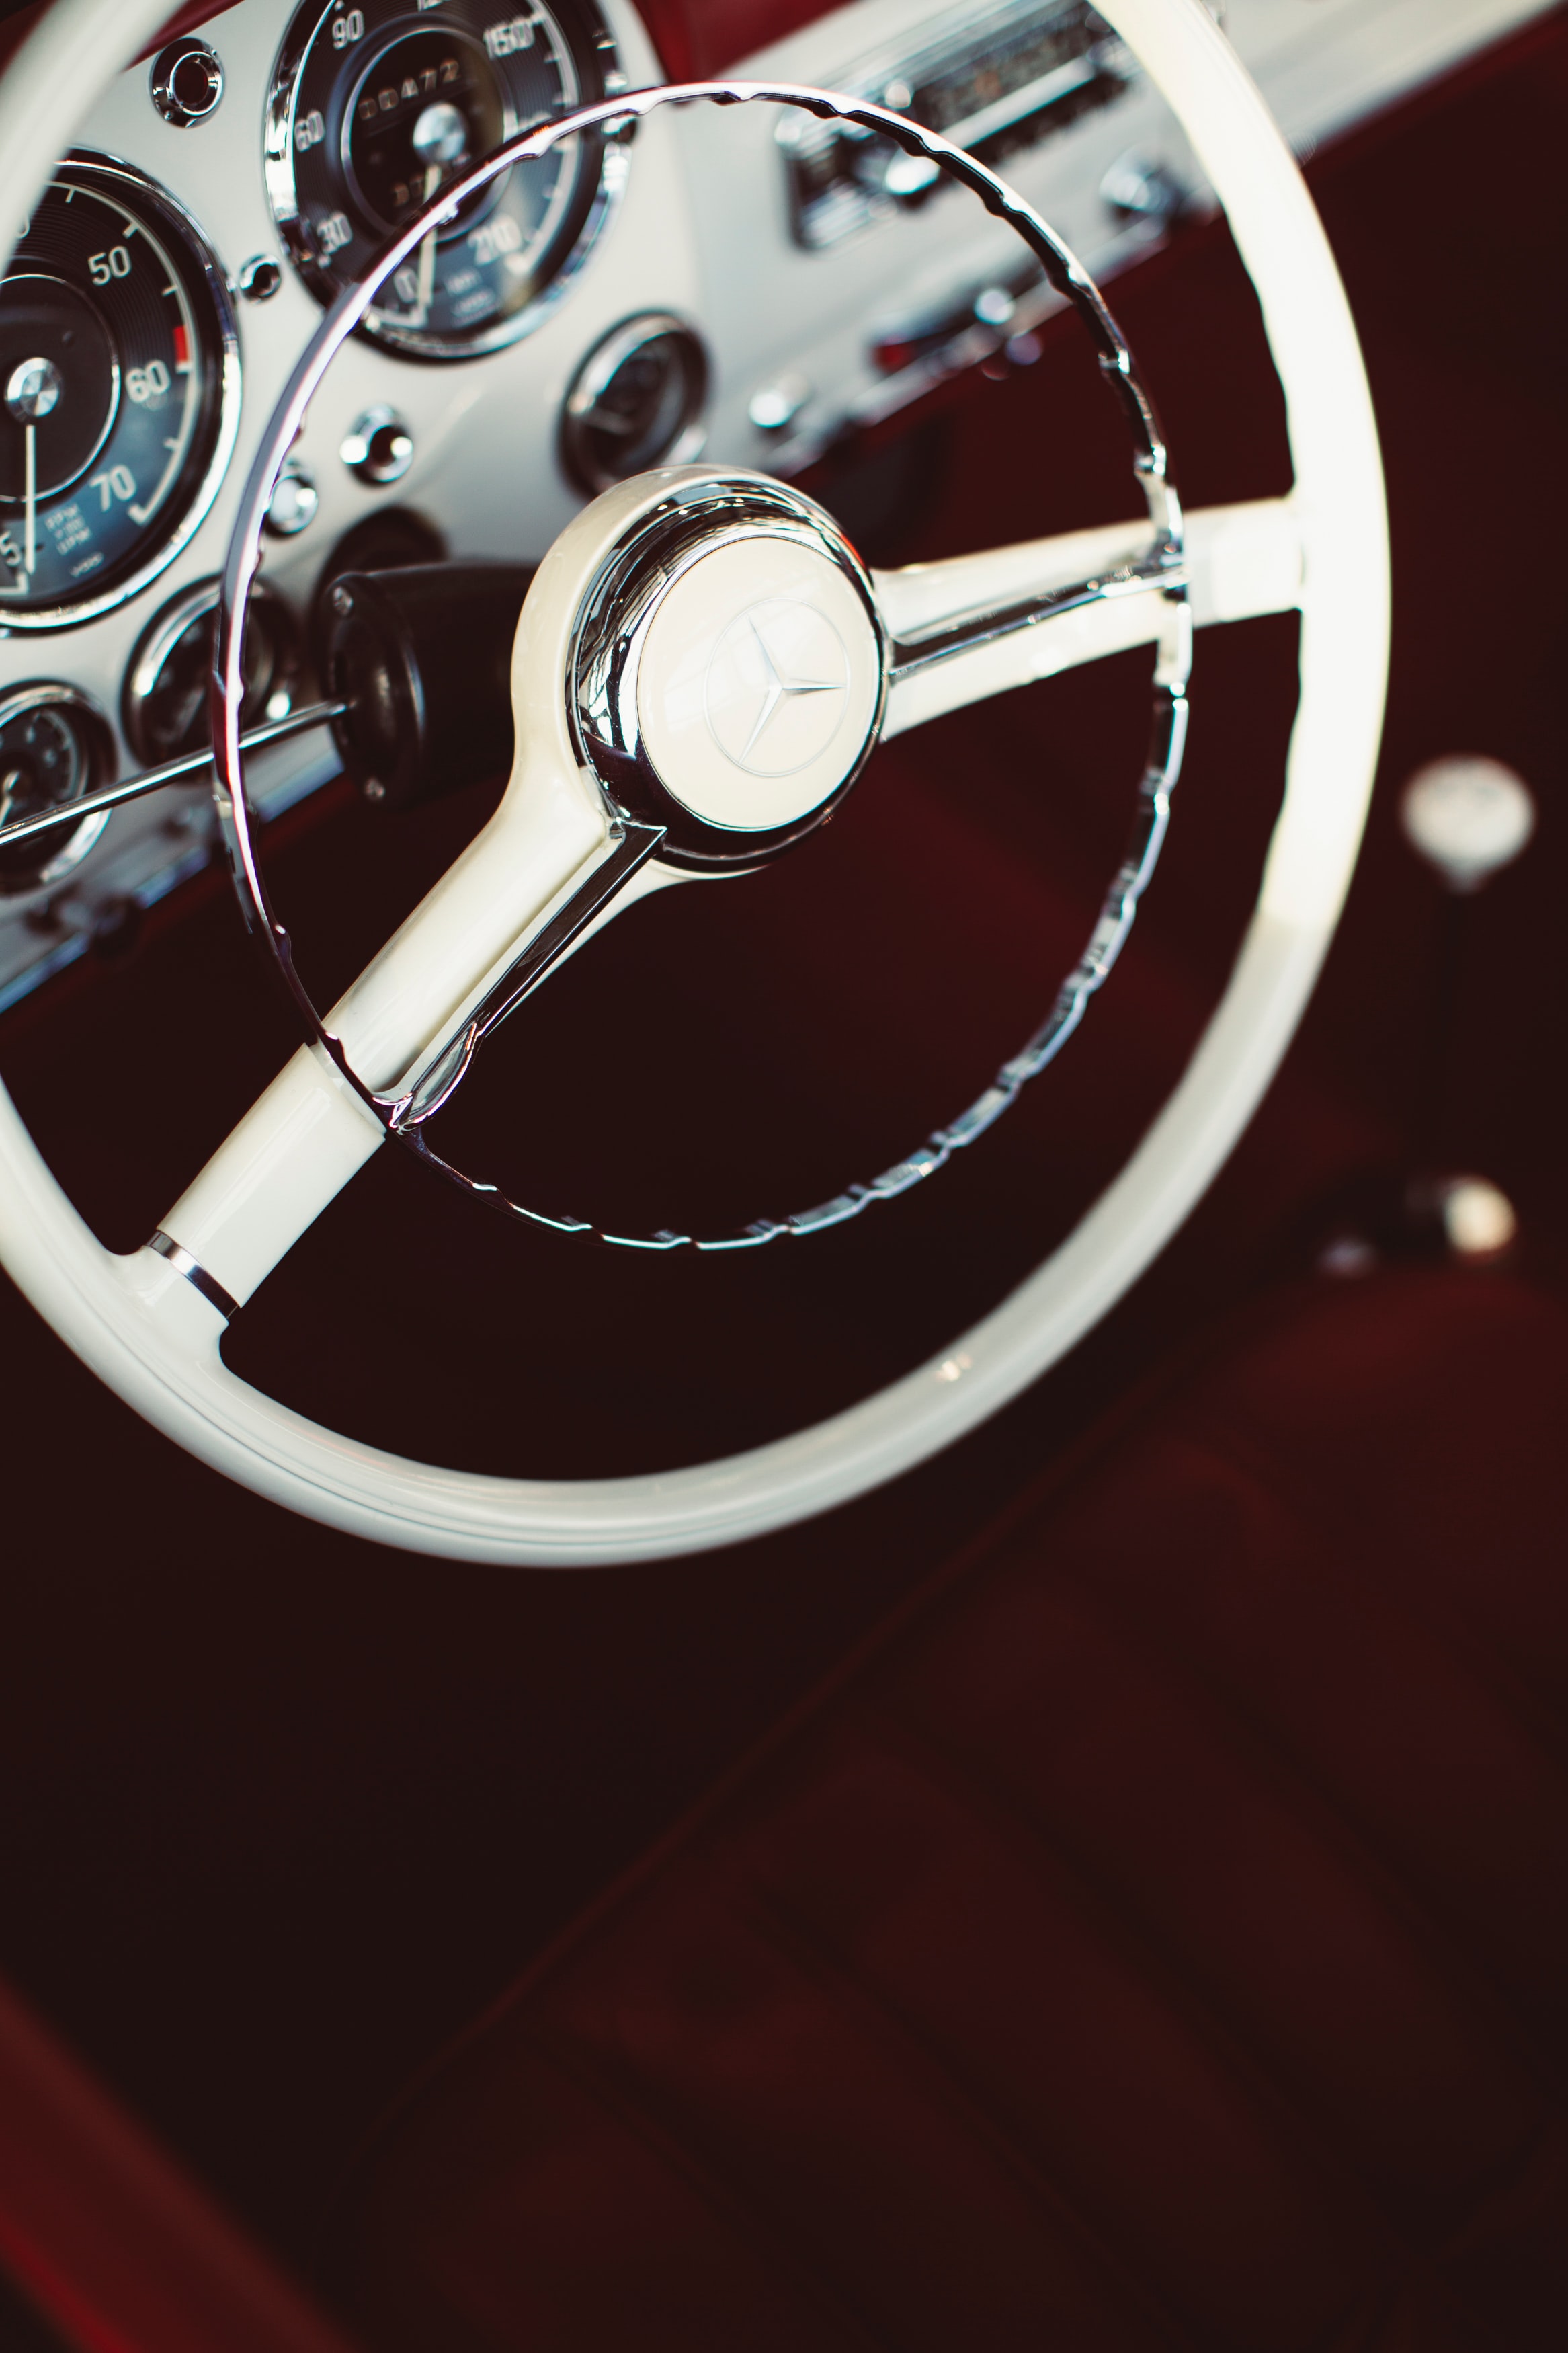 128640 download wallpaper mercedes, cars, white, car, machine, steering wheel, rudder screensavers and pictures for free